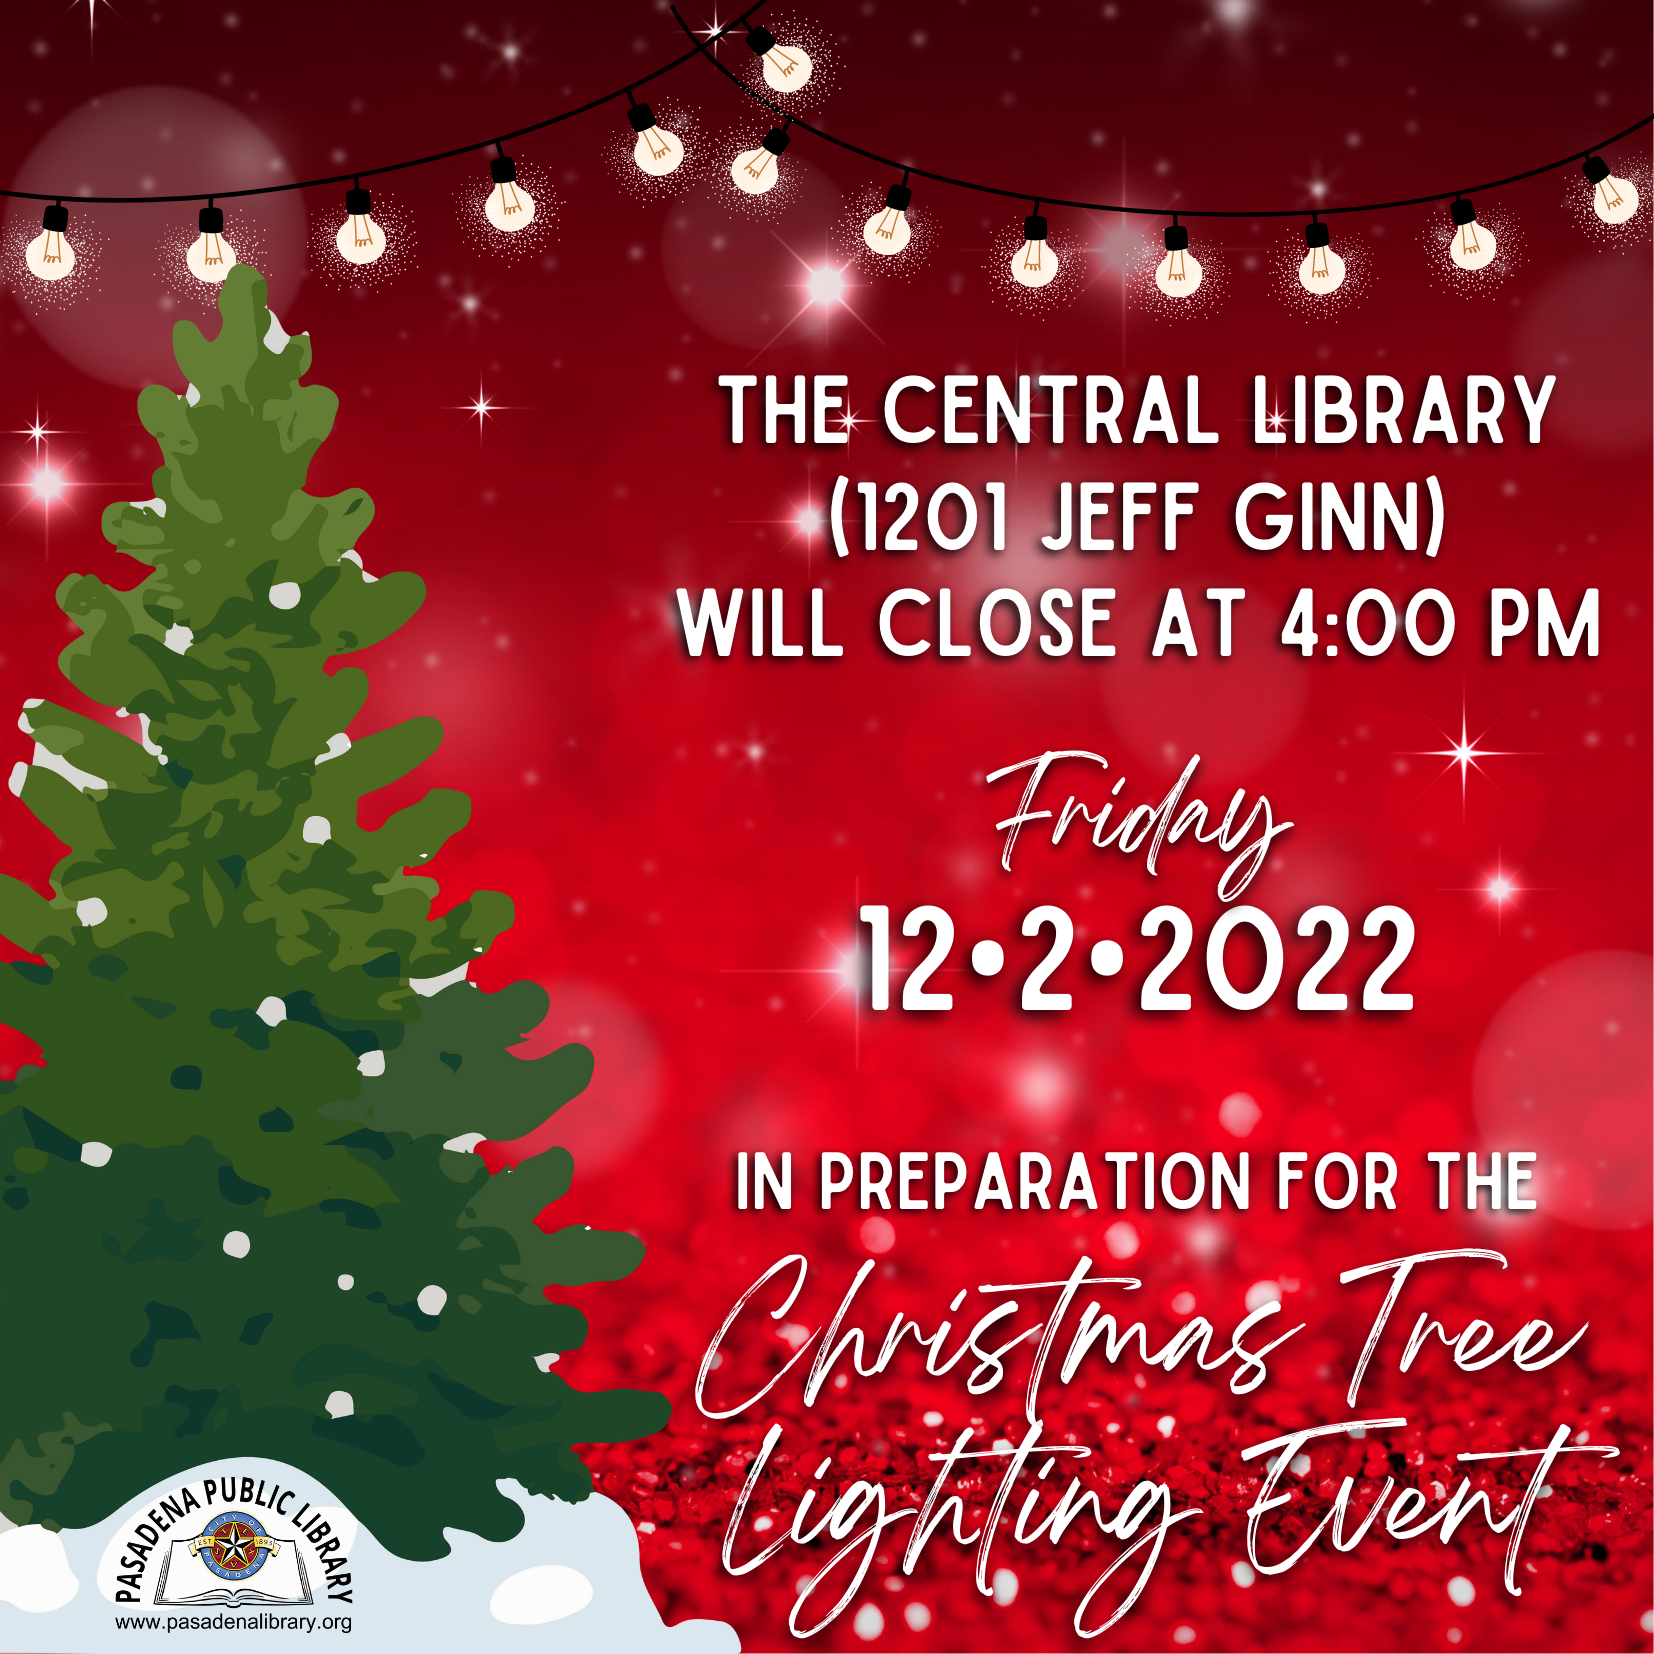 The Central Library (1201 Jeff Ginn) will CLOSE at 4:00 PM on Friday, December 2, 2022 in preparation of the City of Pasadena Christmas Tree Lighting event.